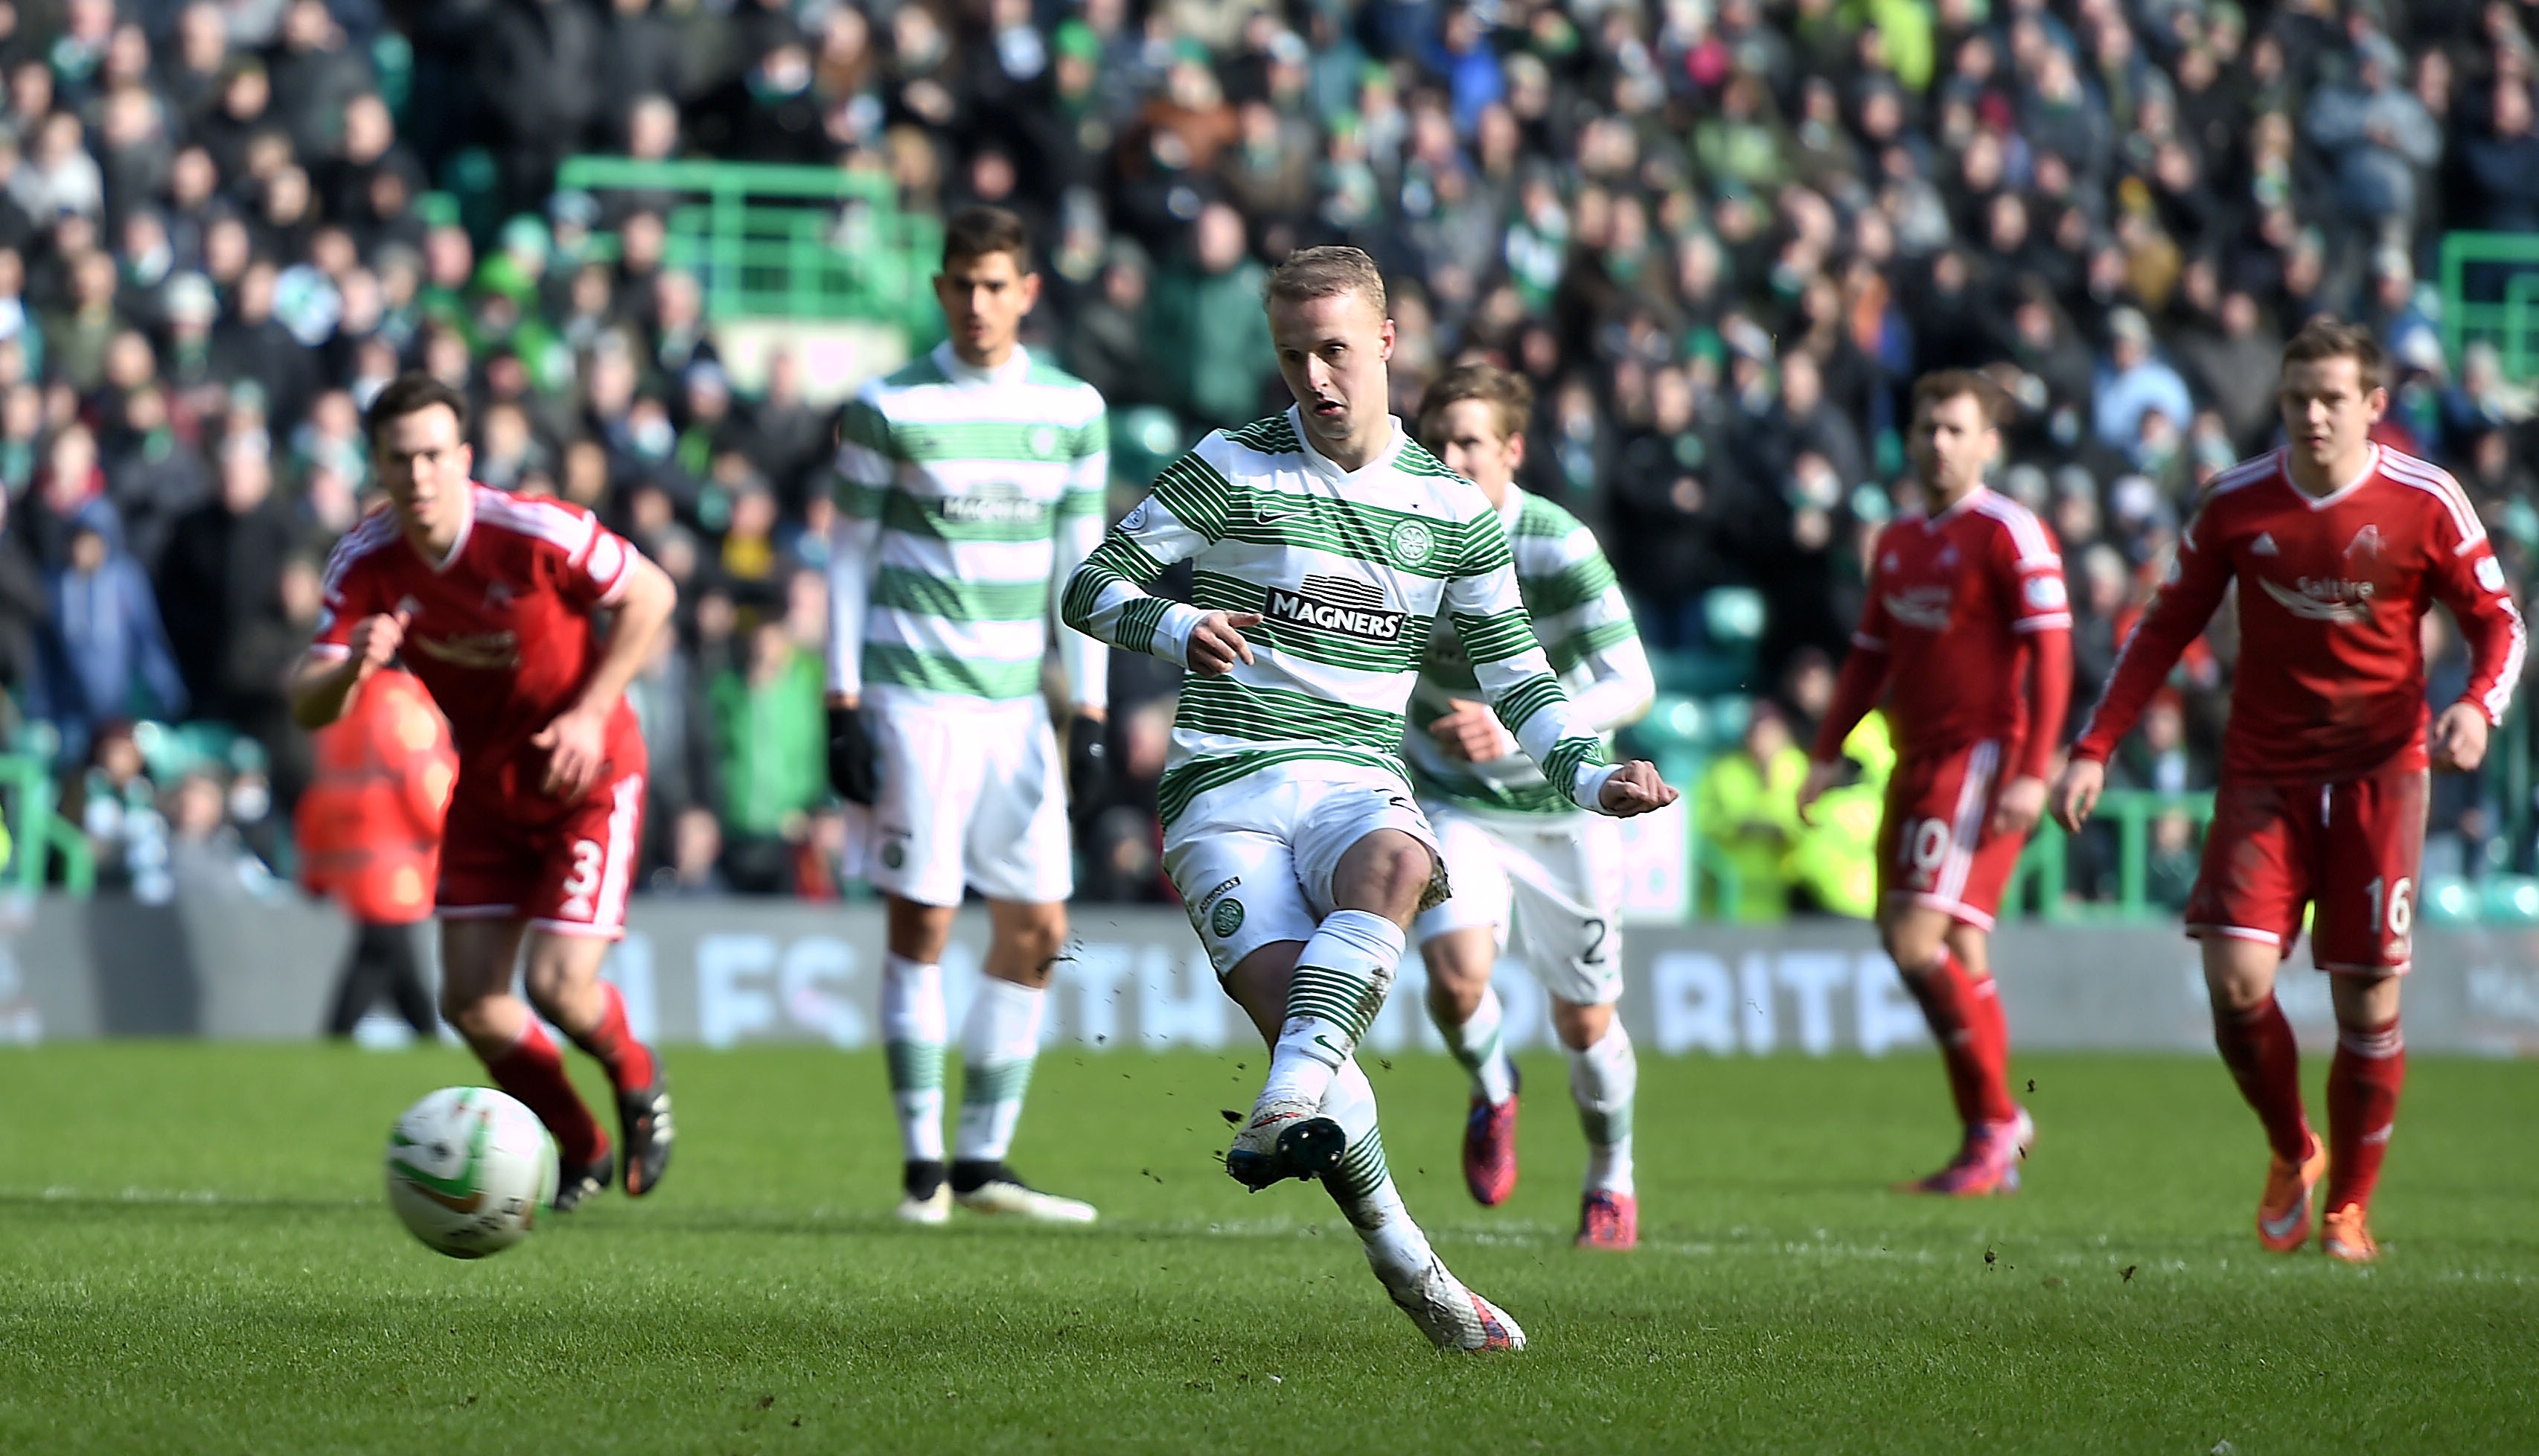 Celtic's Leigh Griffiths slots home from the penalty spot to open the scoring